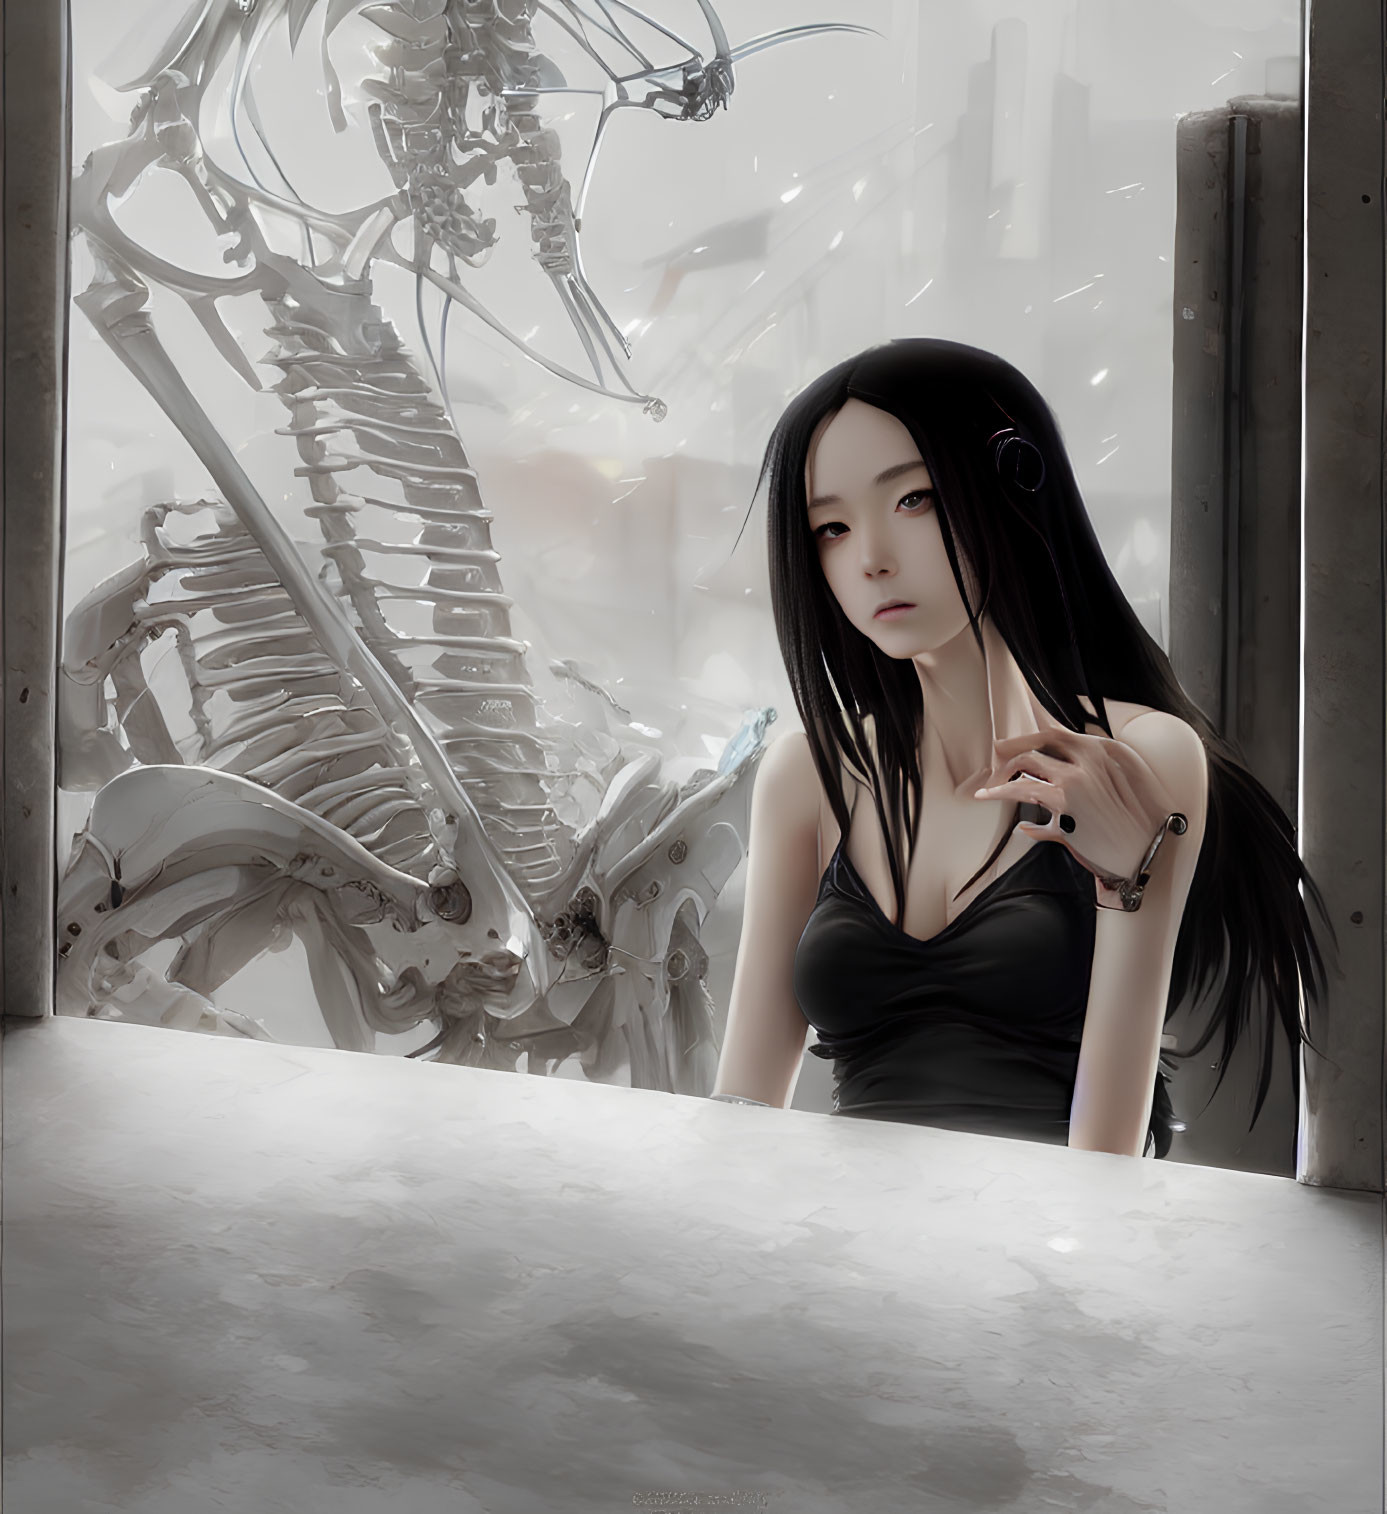 Woman with Long Black Hair Sitting by Dragon Skeleton in Industrial Setting